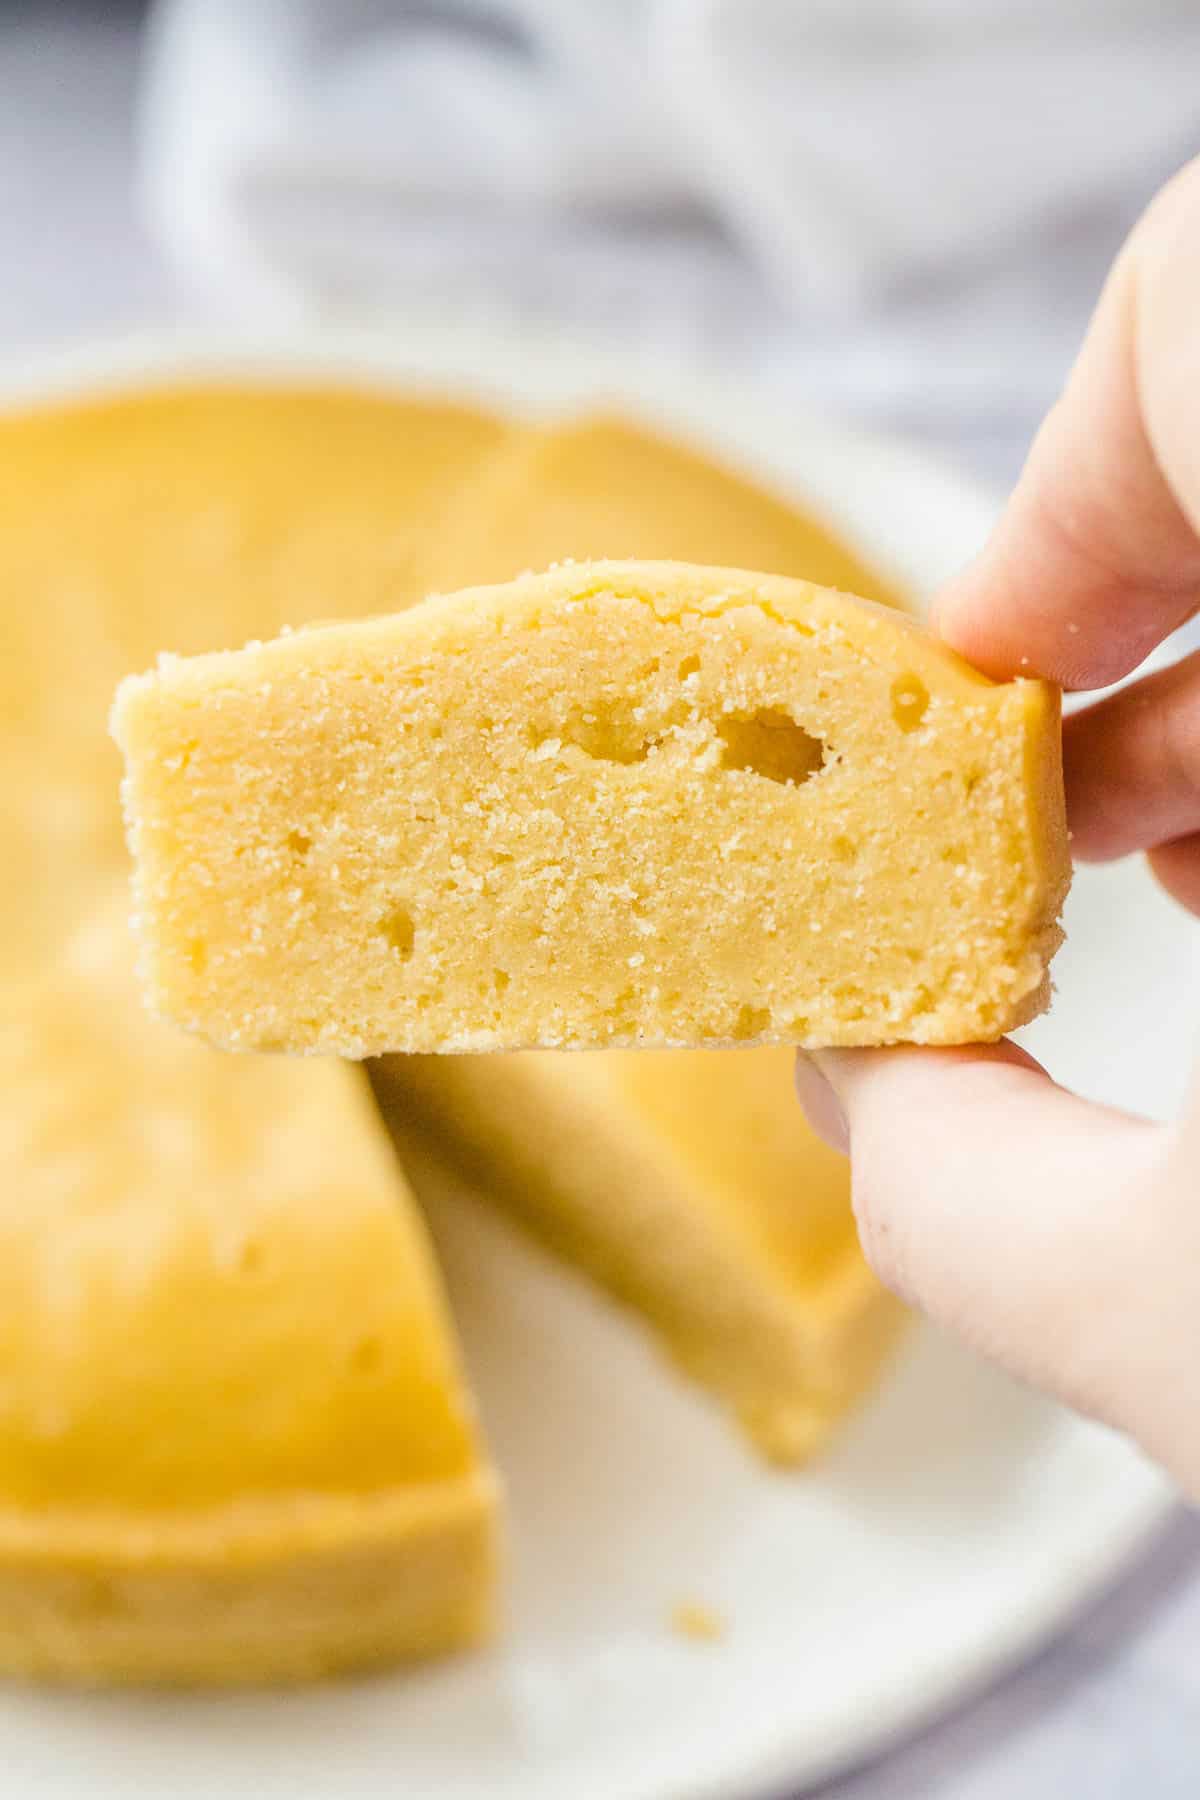 Holding a piece of cornbread in my hand to show the texture